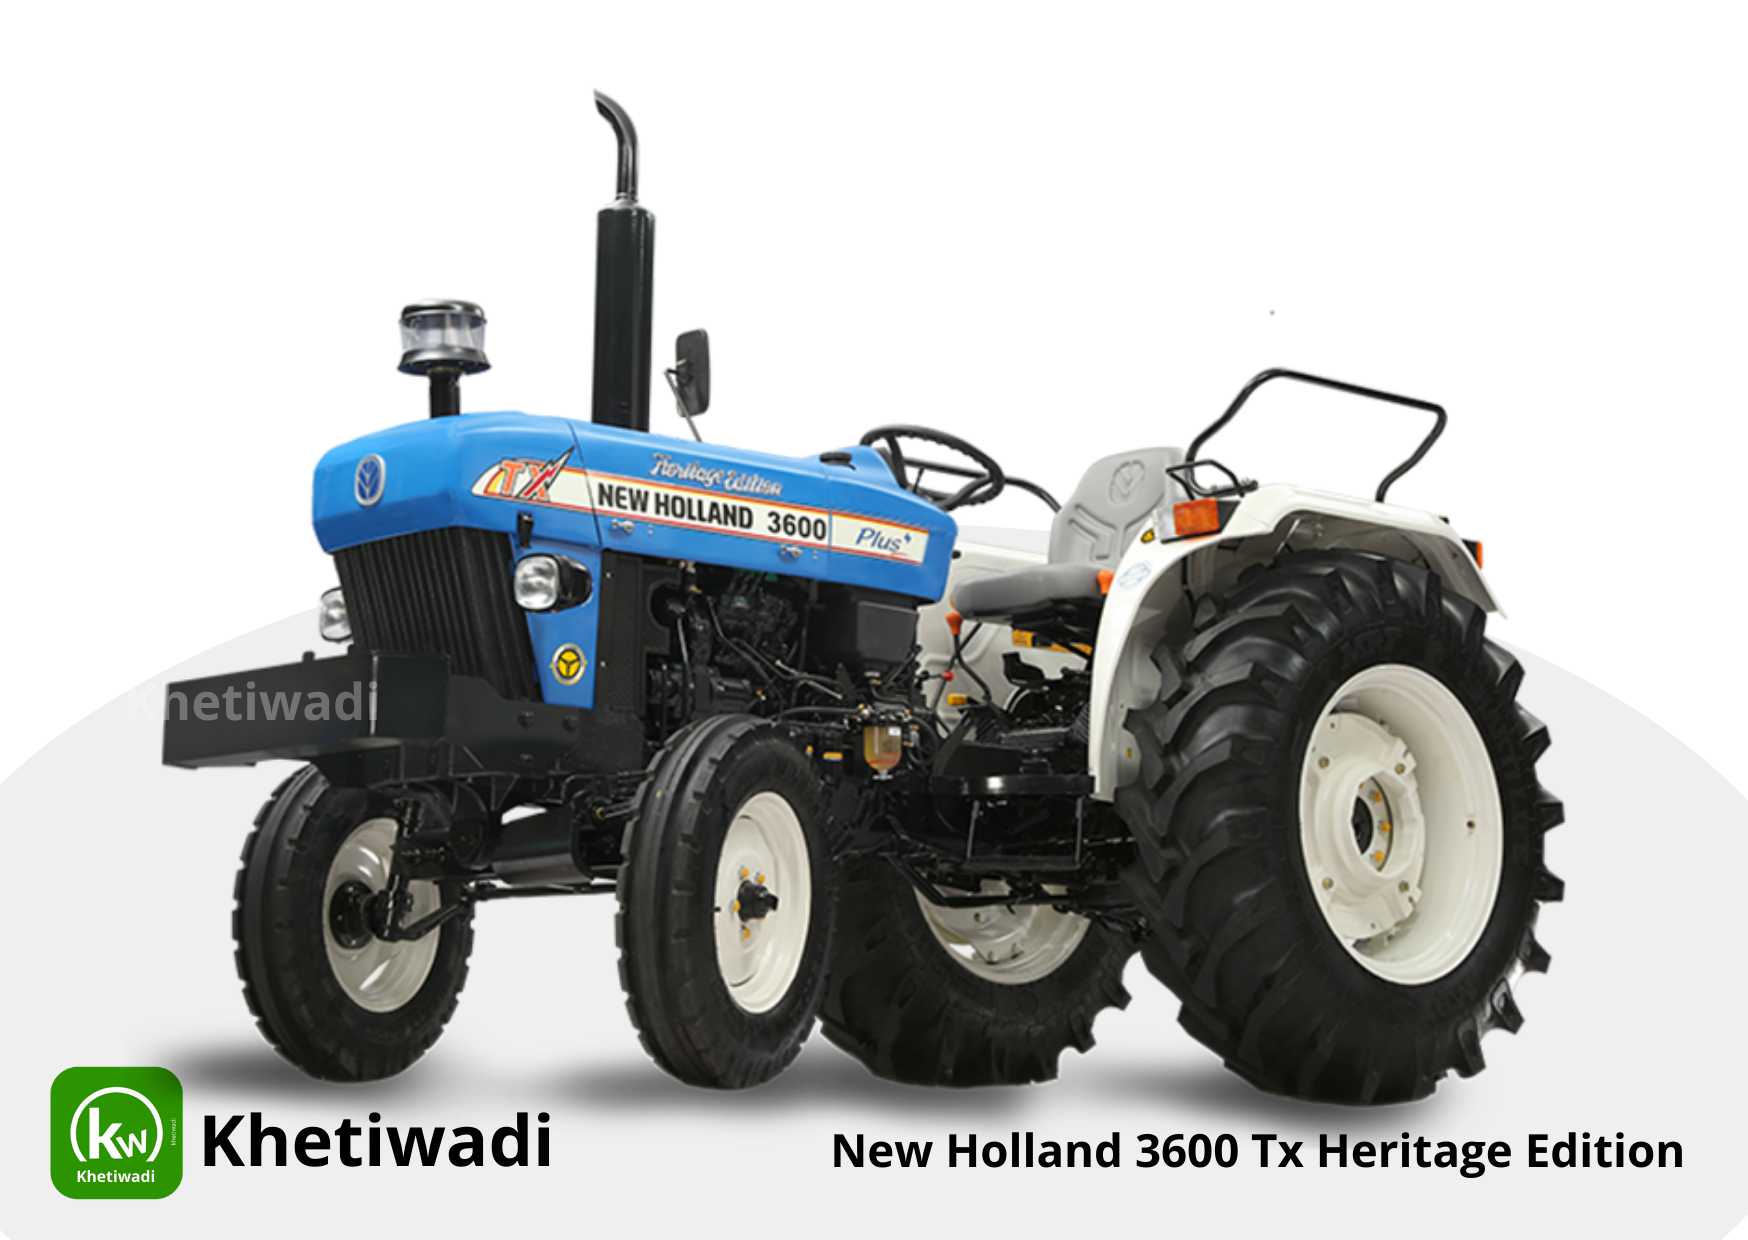 new-holland-3600-tx-heritage-edition